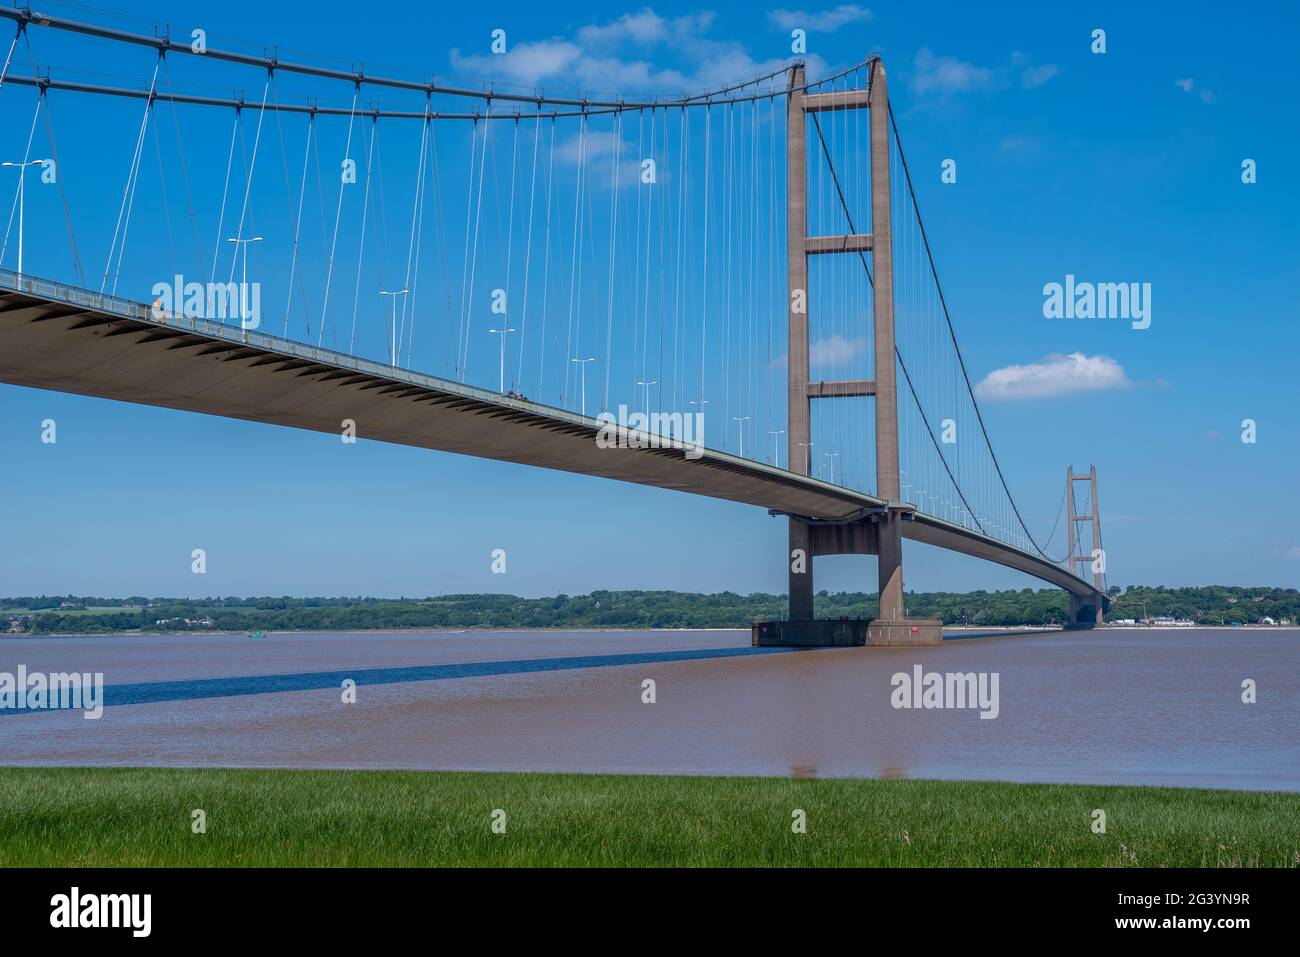 View of the Humber suspension bridge and river with blue sky on a bright sunny day. Stock Photo